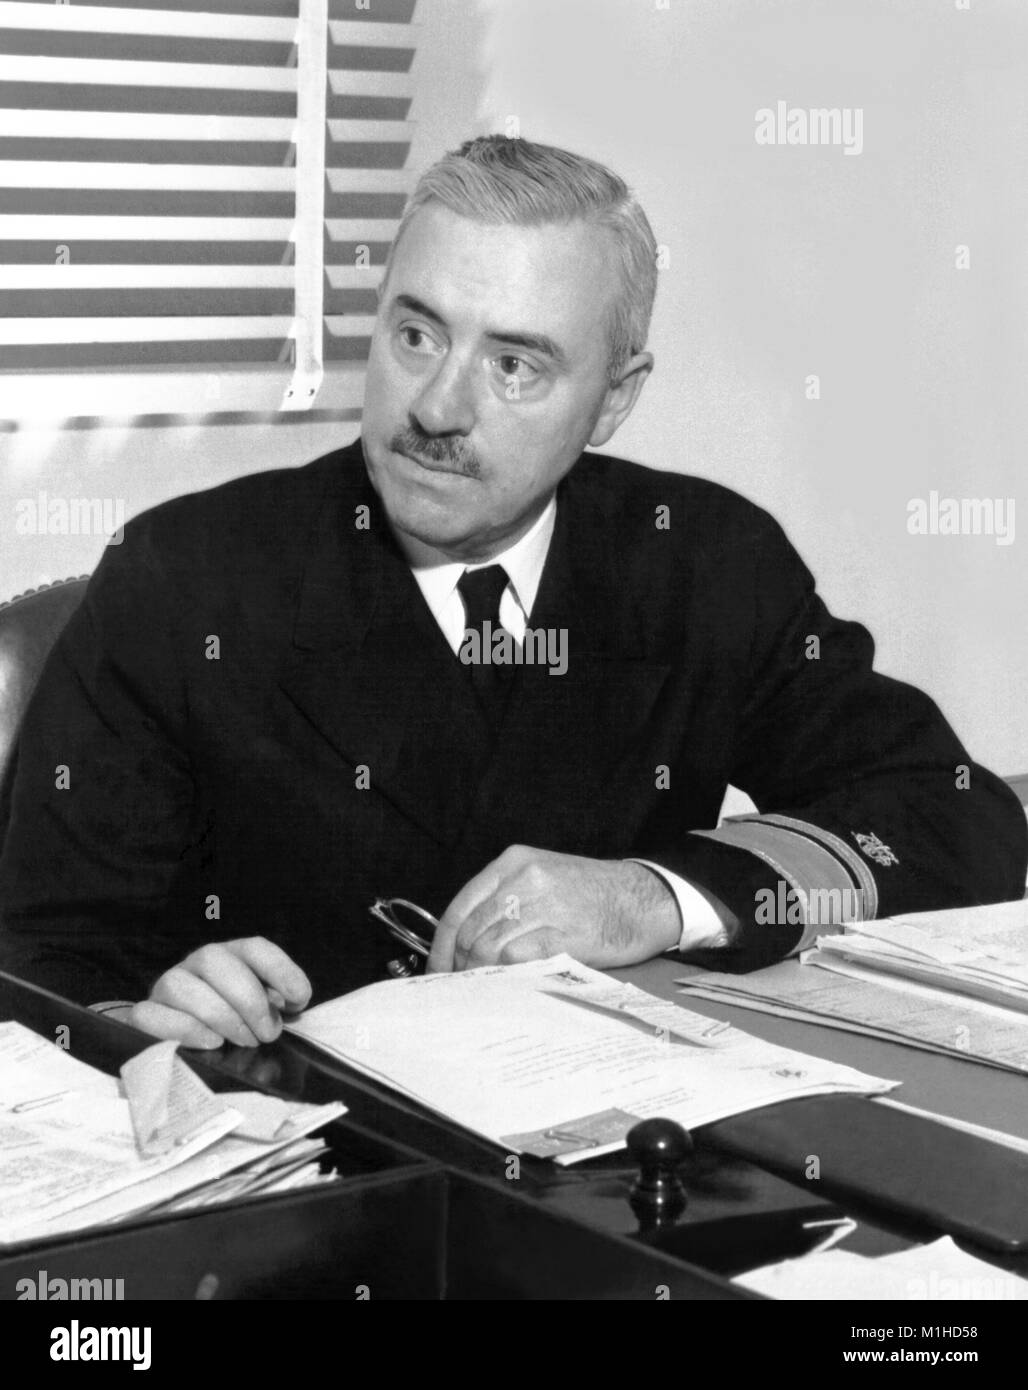 Photograph showing Thomas Parran, Jr. M.D. seated at a desk in an office setting, Parran as the sixth United States Surgeon General (1936-1948) took part in creating the modern American health system and debated the role of the national government in public health, and his legacy includes contributions in the field of venereal diseases research, 1956. Image courtesy CDC. () Stock Photo